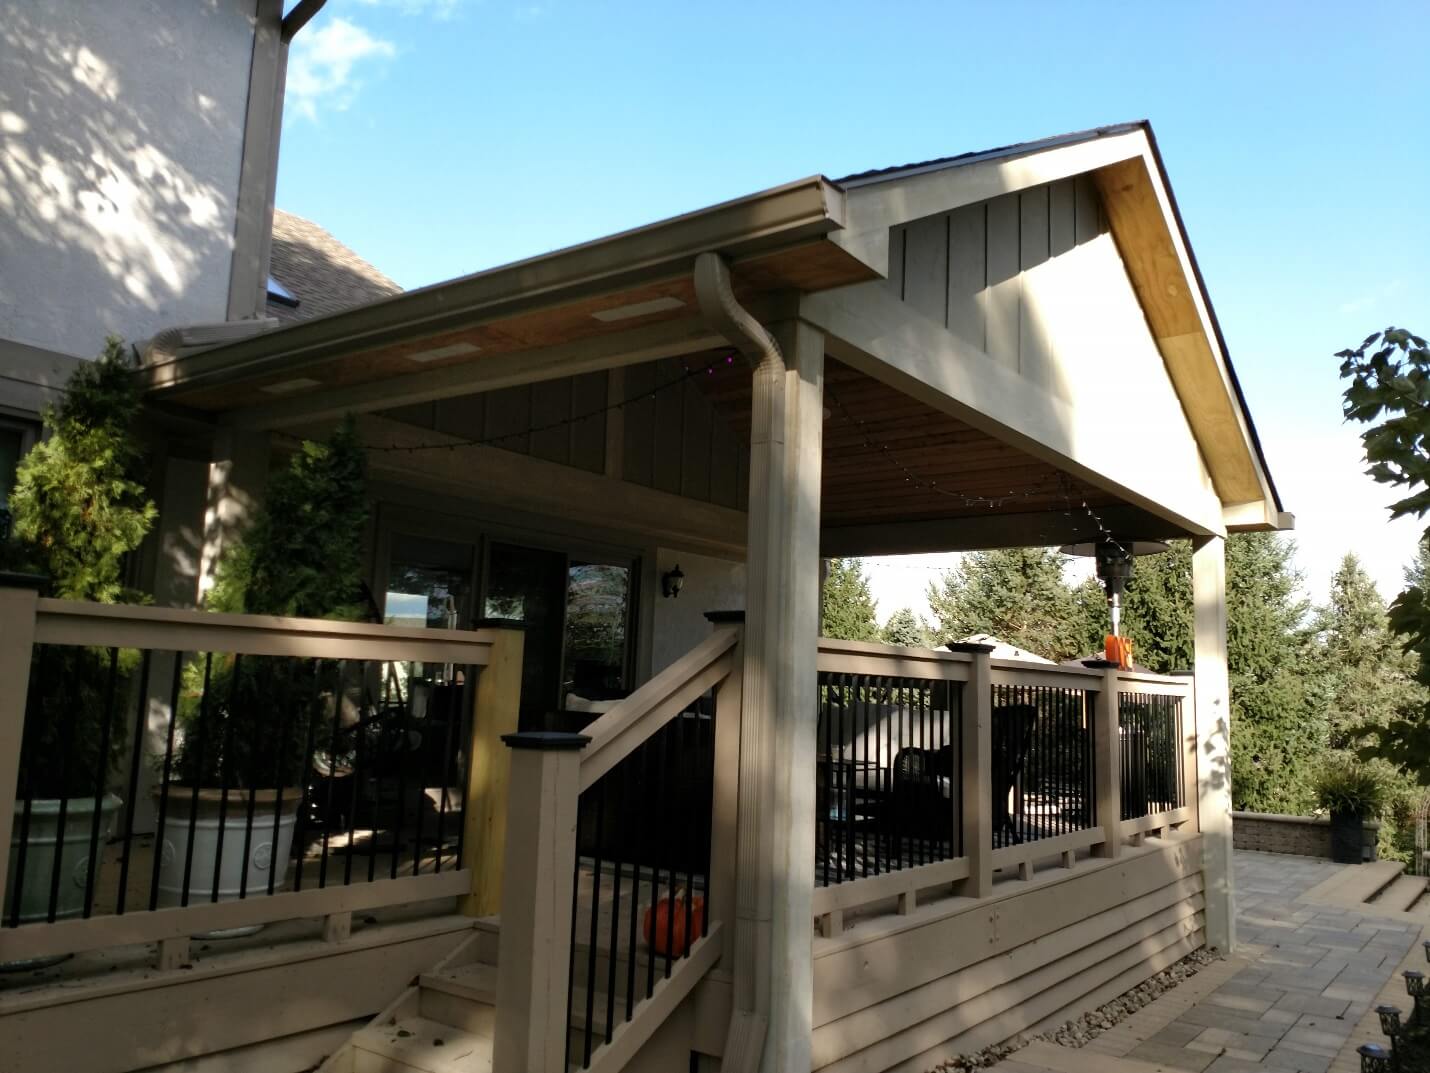 Covered porch with open side deck